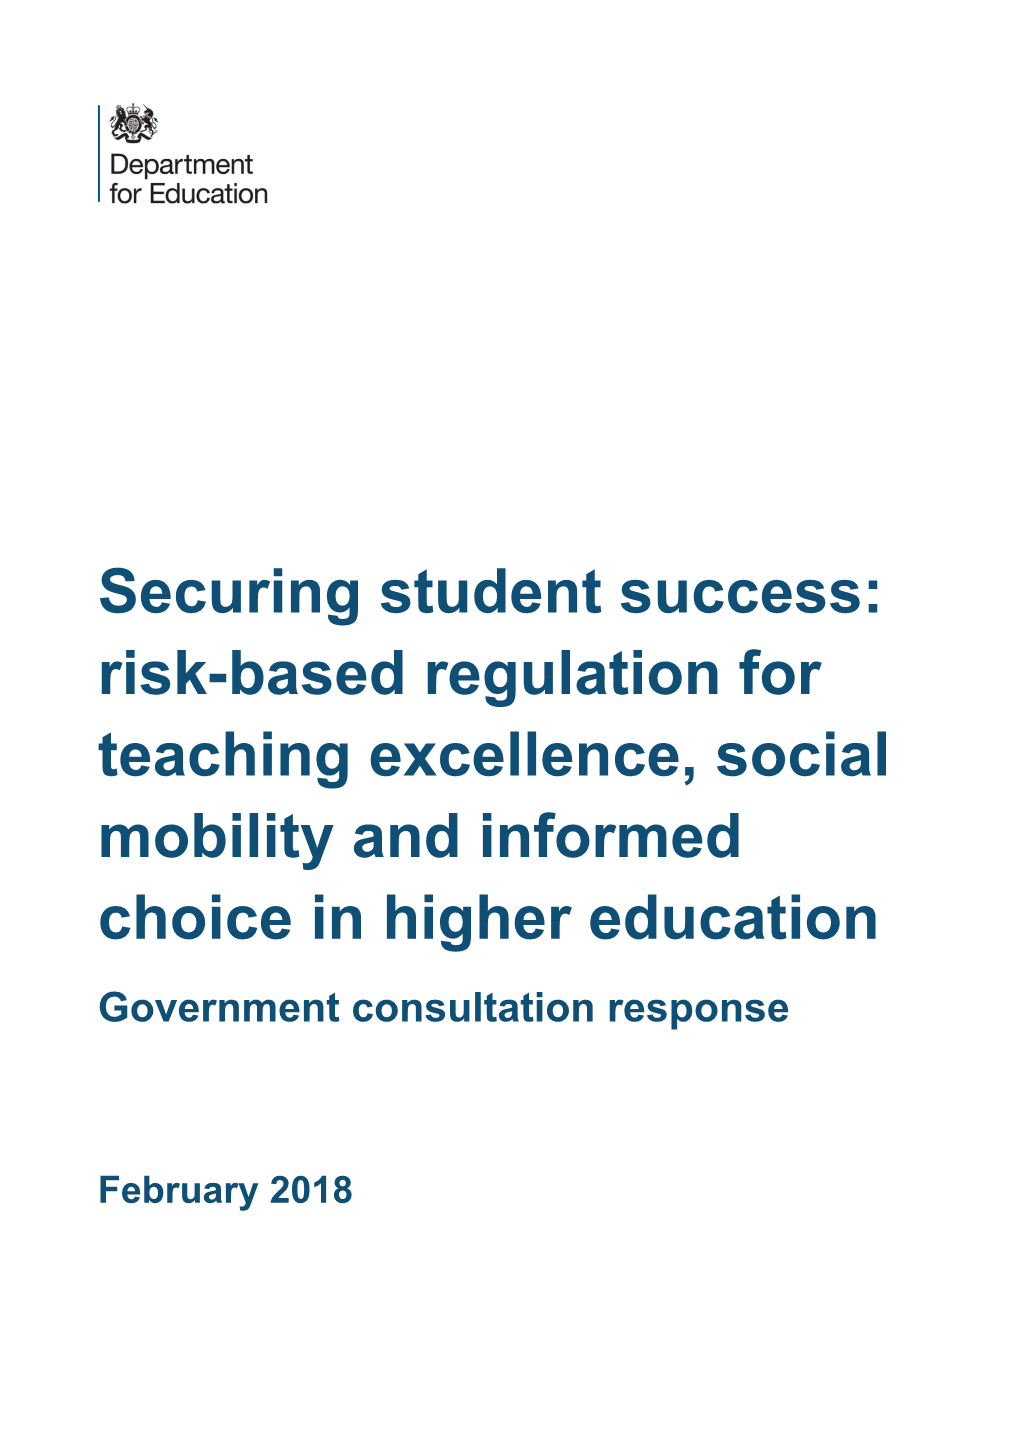 Securing Student Success: Risk-Based Regulation for Teaching Excellence, Social Mobility and Informed Choice in Higher Education Government Consultation Response